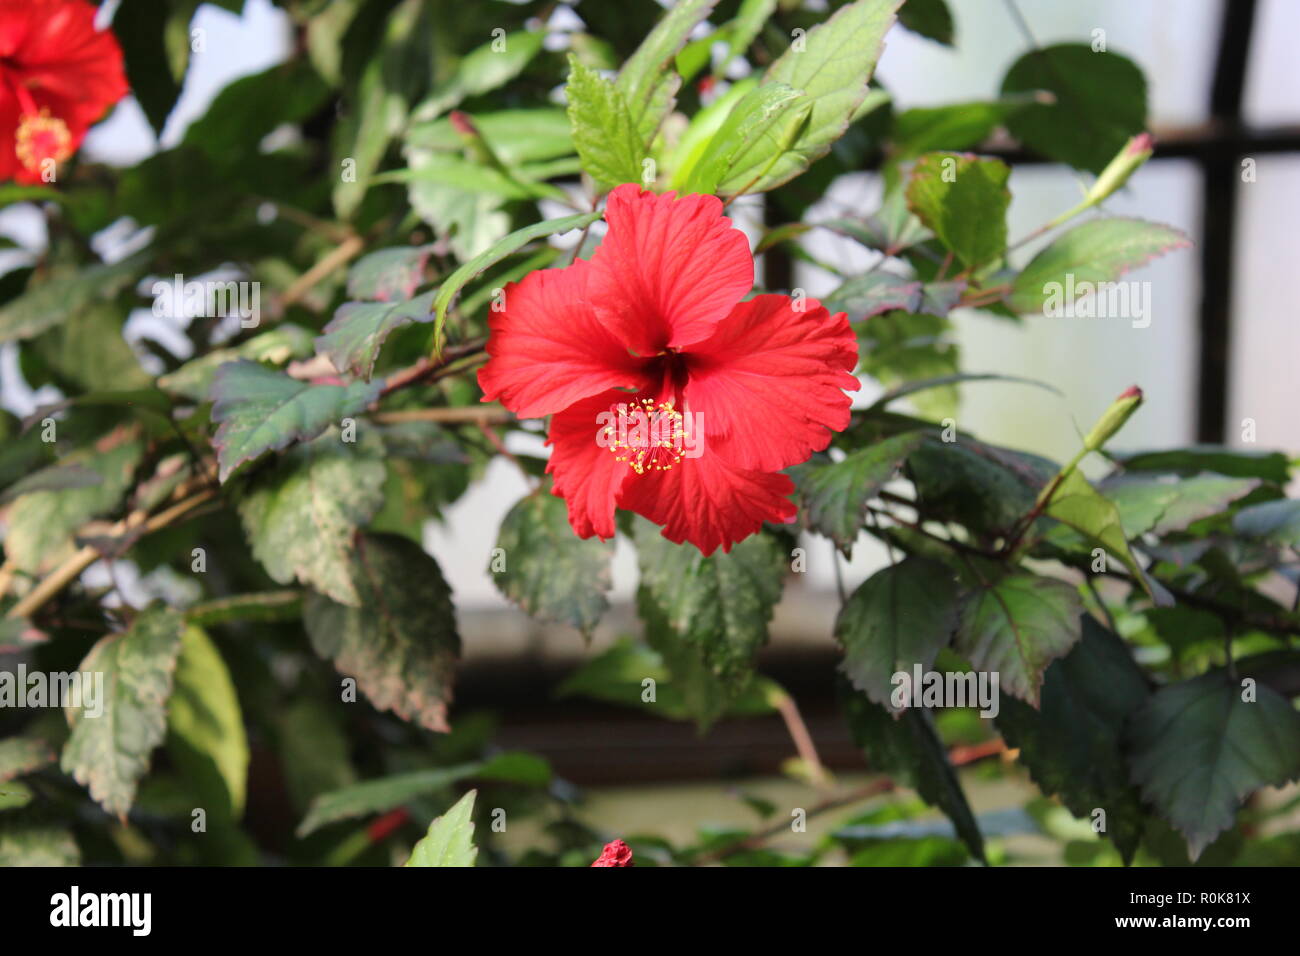 Flawless, beautiful, stunning cultivated Hawaiian hibiscus,Hibiscus rosa-sinensis, flower plants growing in the flower garden. Stock Photo